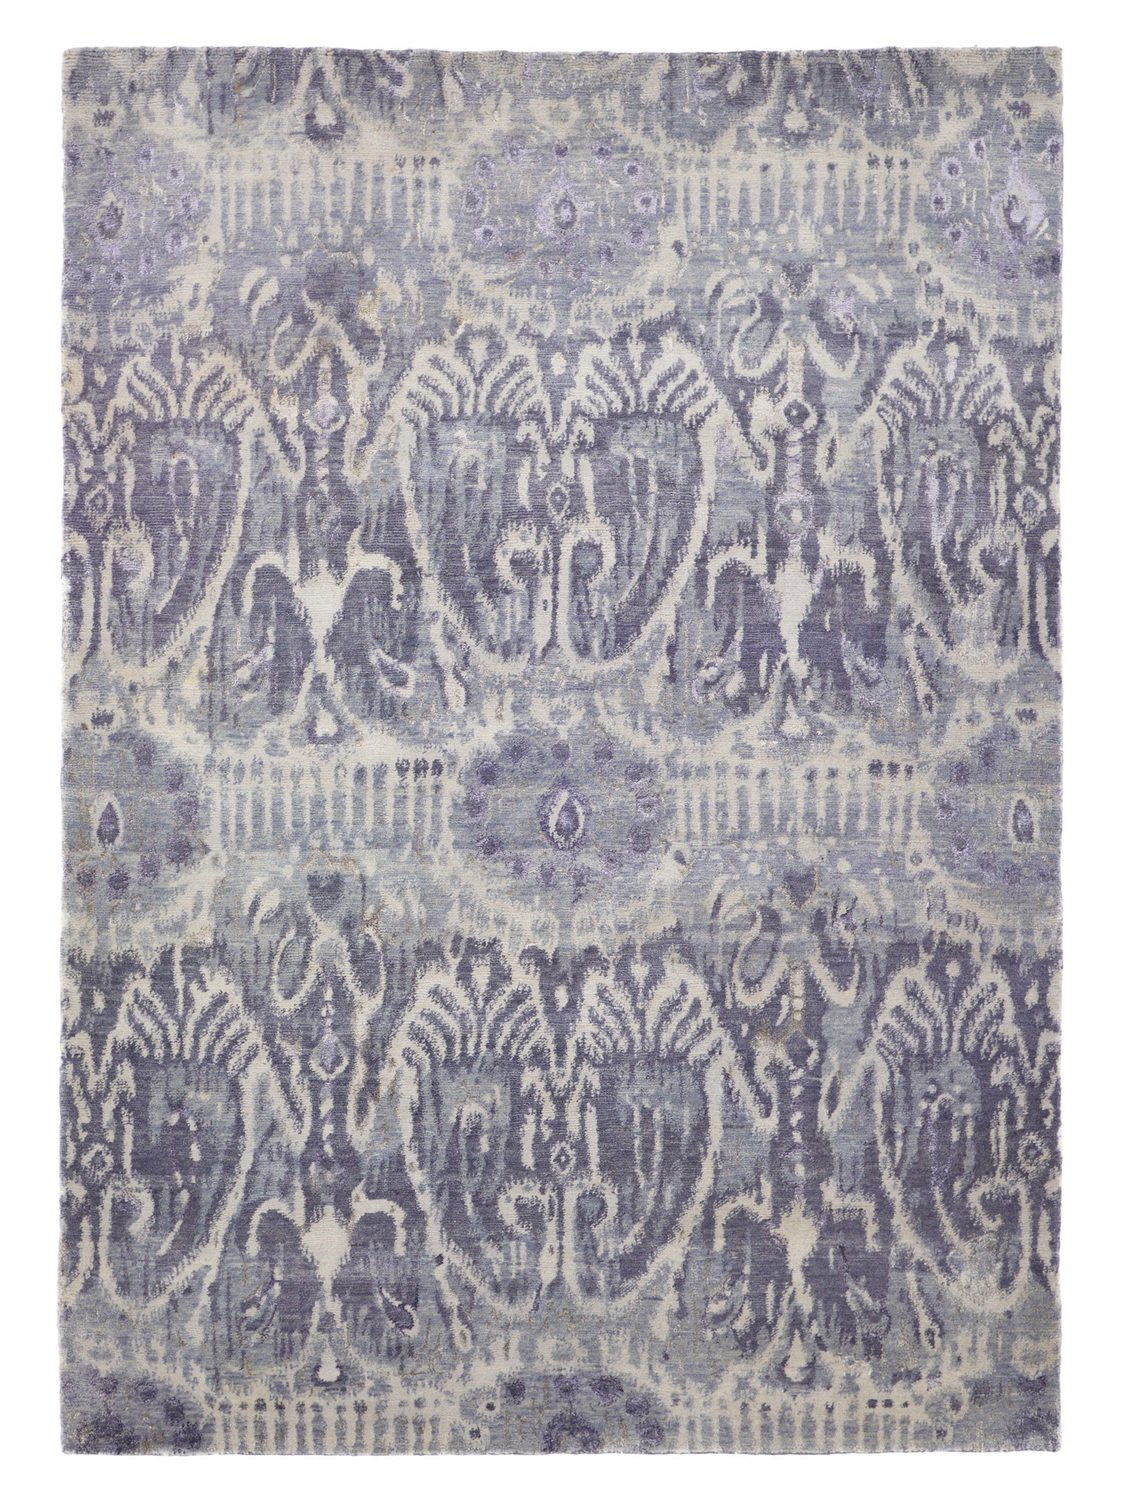 Indian Ikat wool and viscose rug 240 x 170 Final Reduction